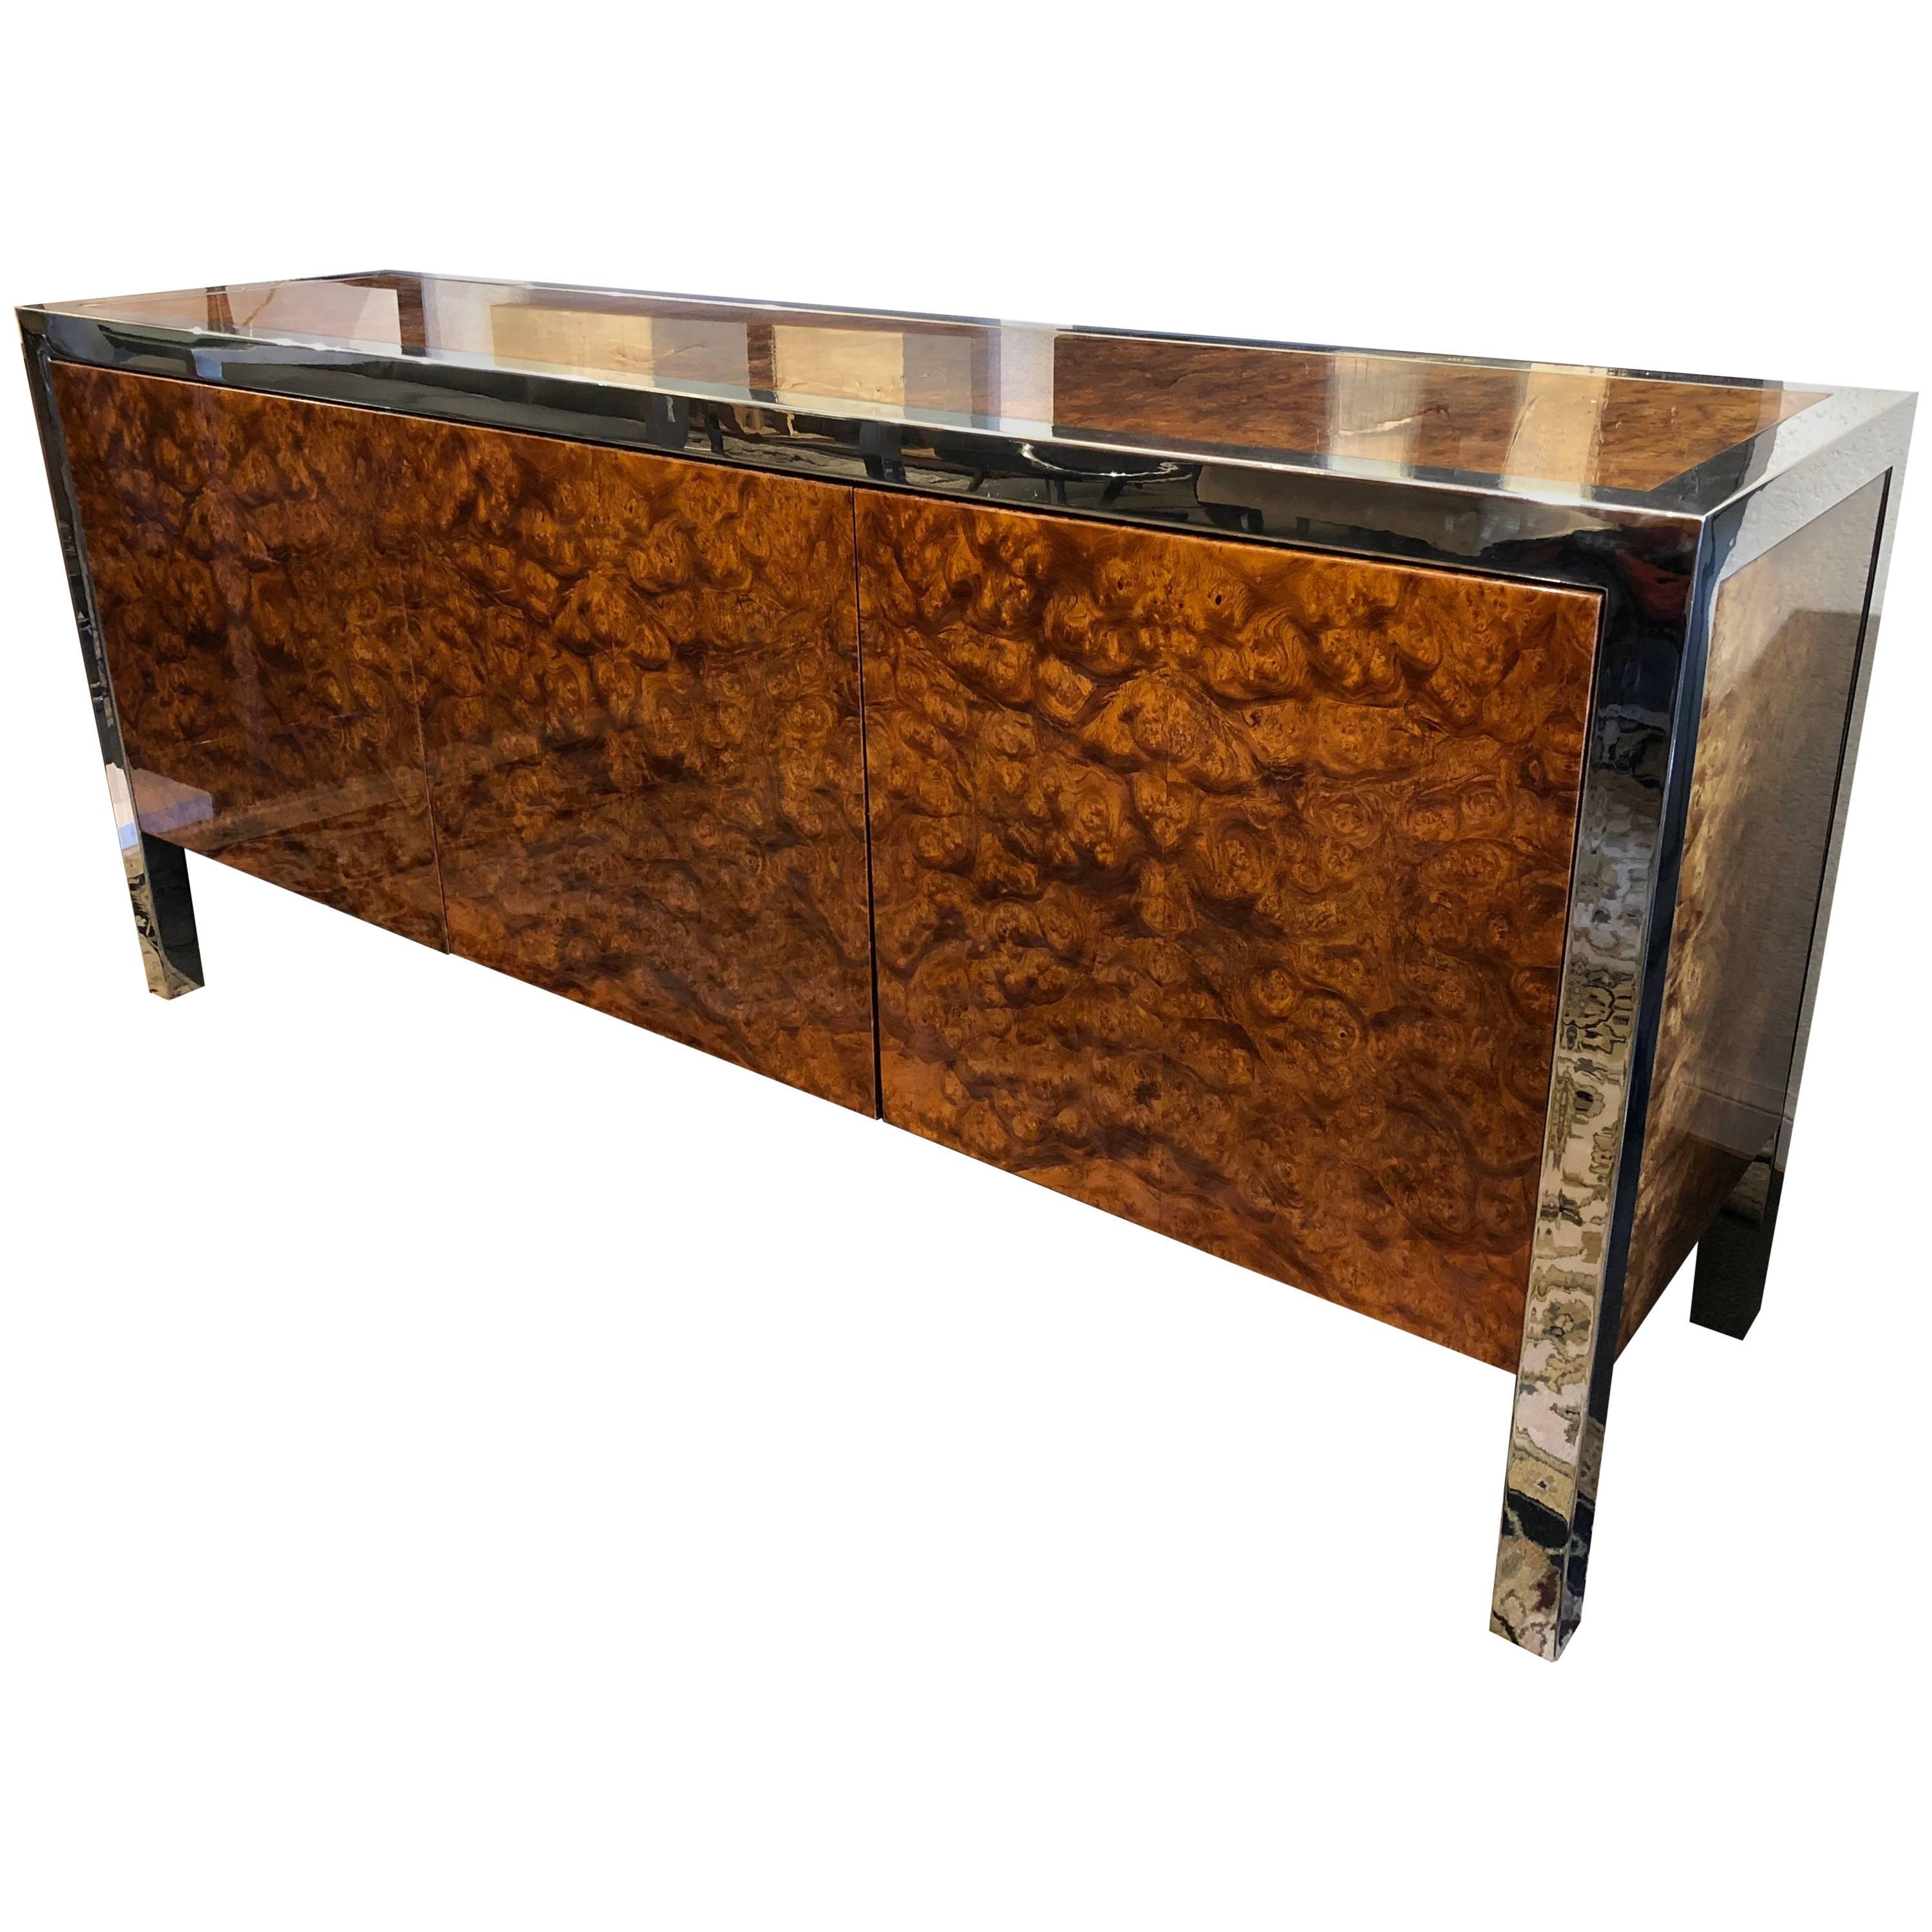 Leon Rosen for Pace Collection Olive Burl Stainless Credenza For Sale